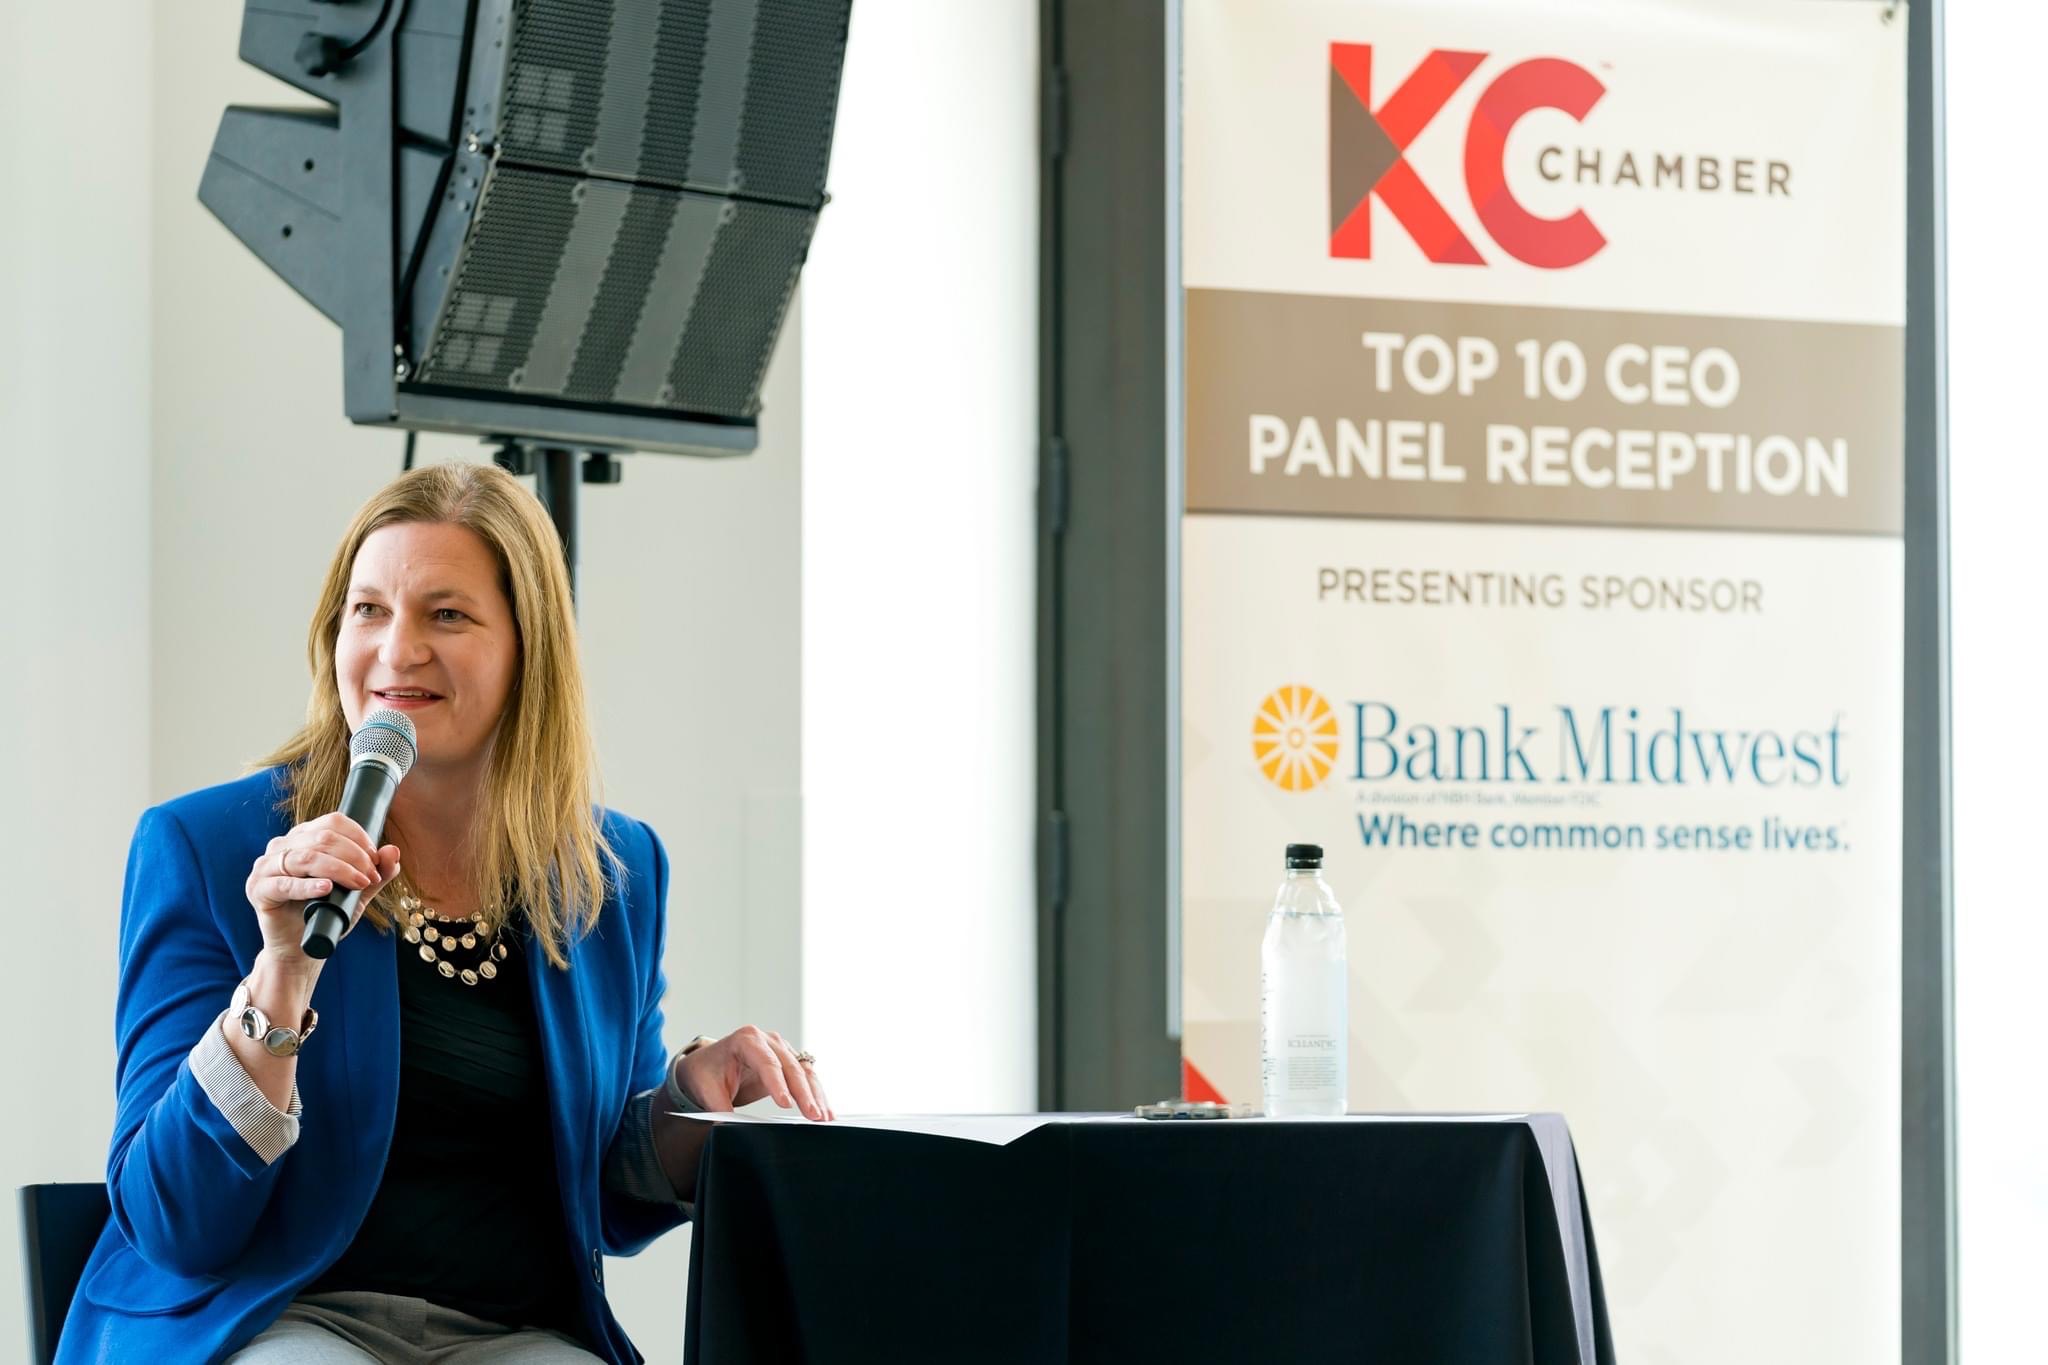 Bank Midwest Top 10 CEO Panel Reception